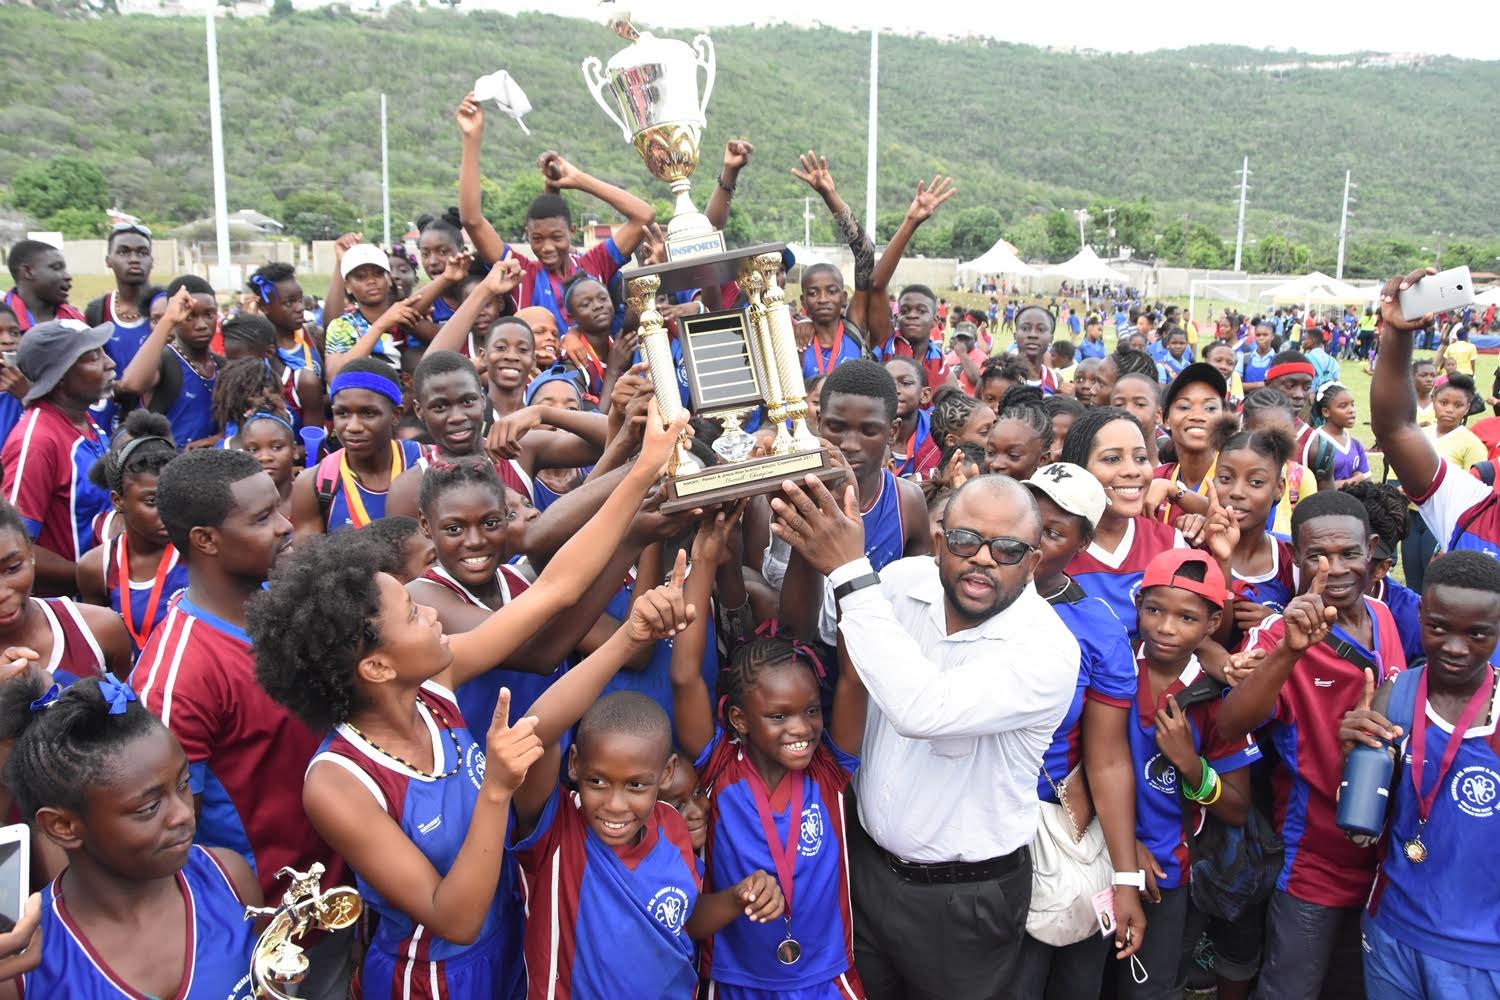 Windward Road clinch 4th straight All-Age & Junior High Champs title